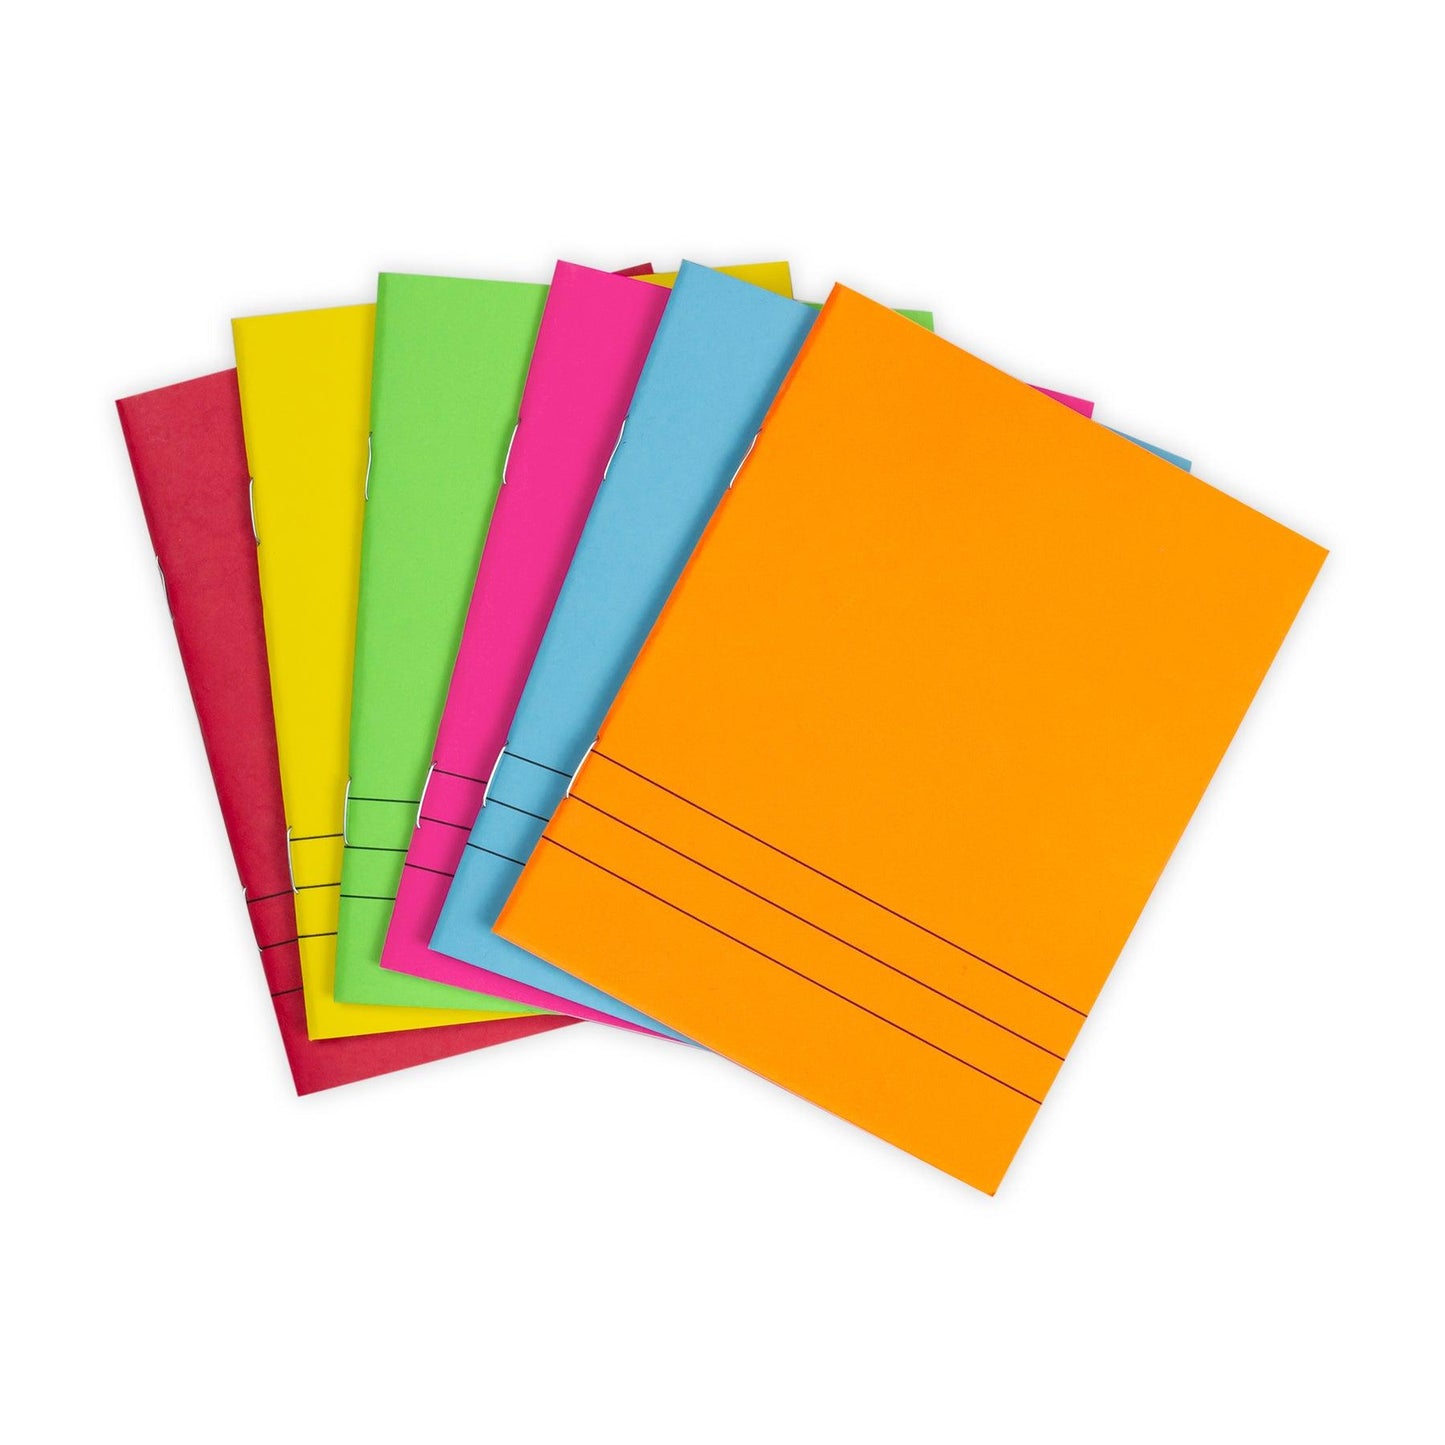 Bright Colors Lined Blank Books - 4.25 x 5.5" - Pack of 24 - Loomini